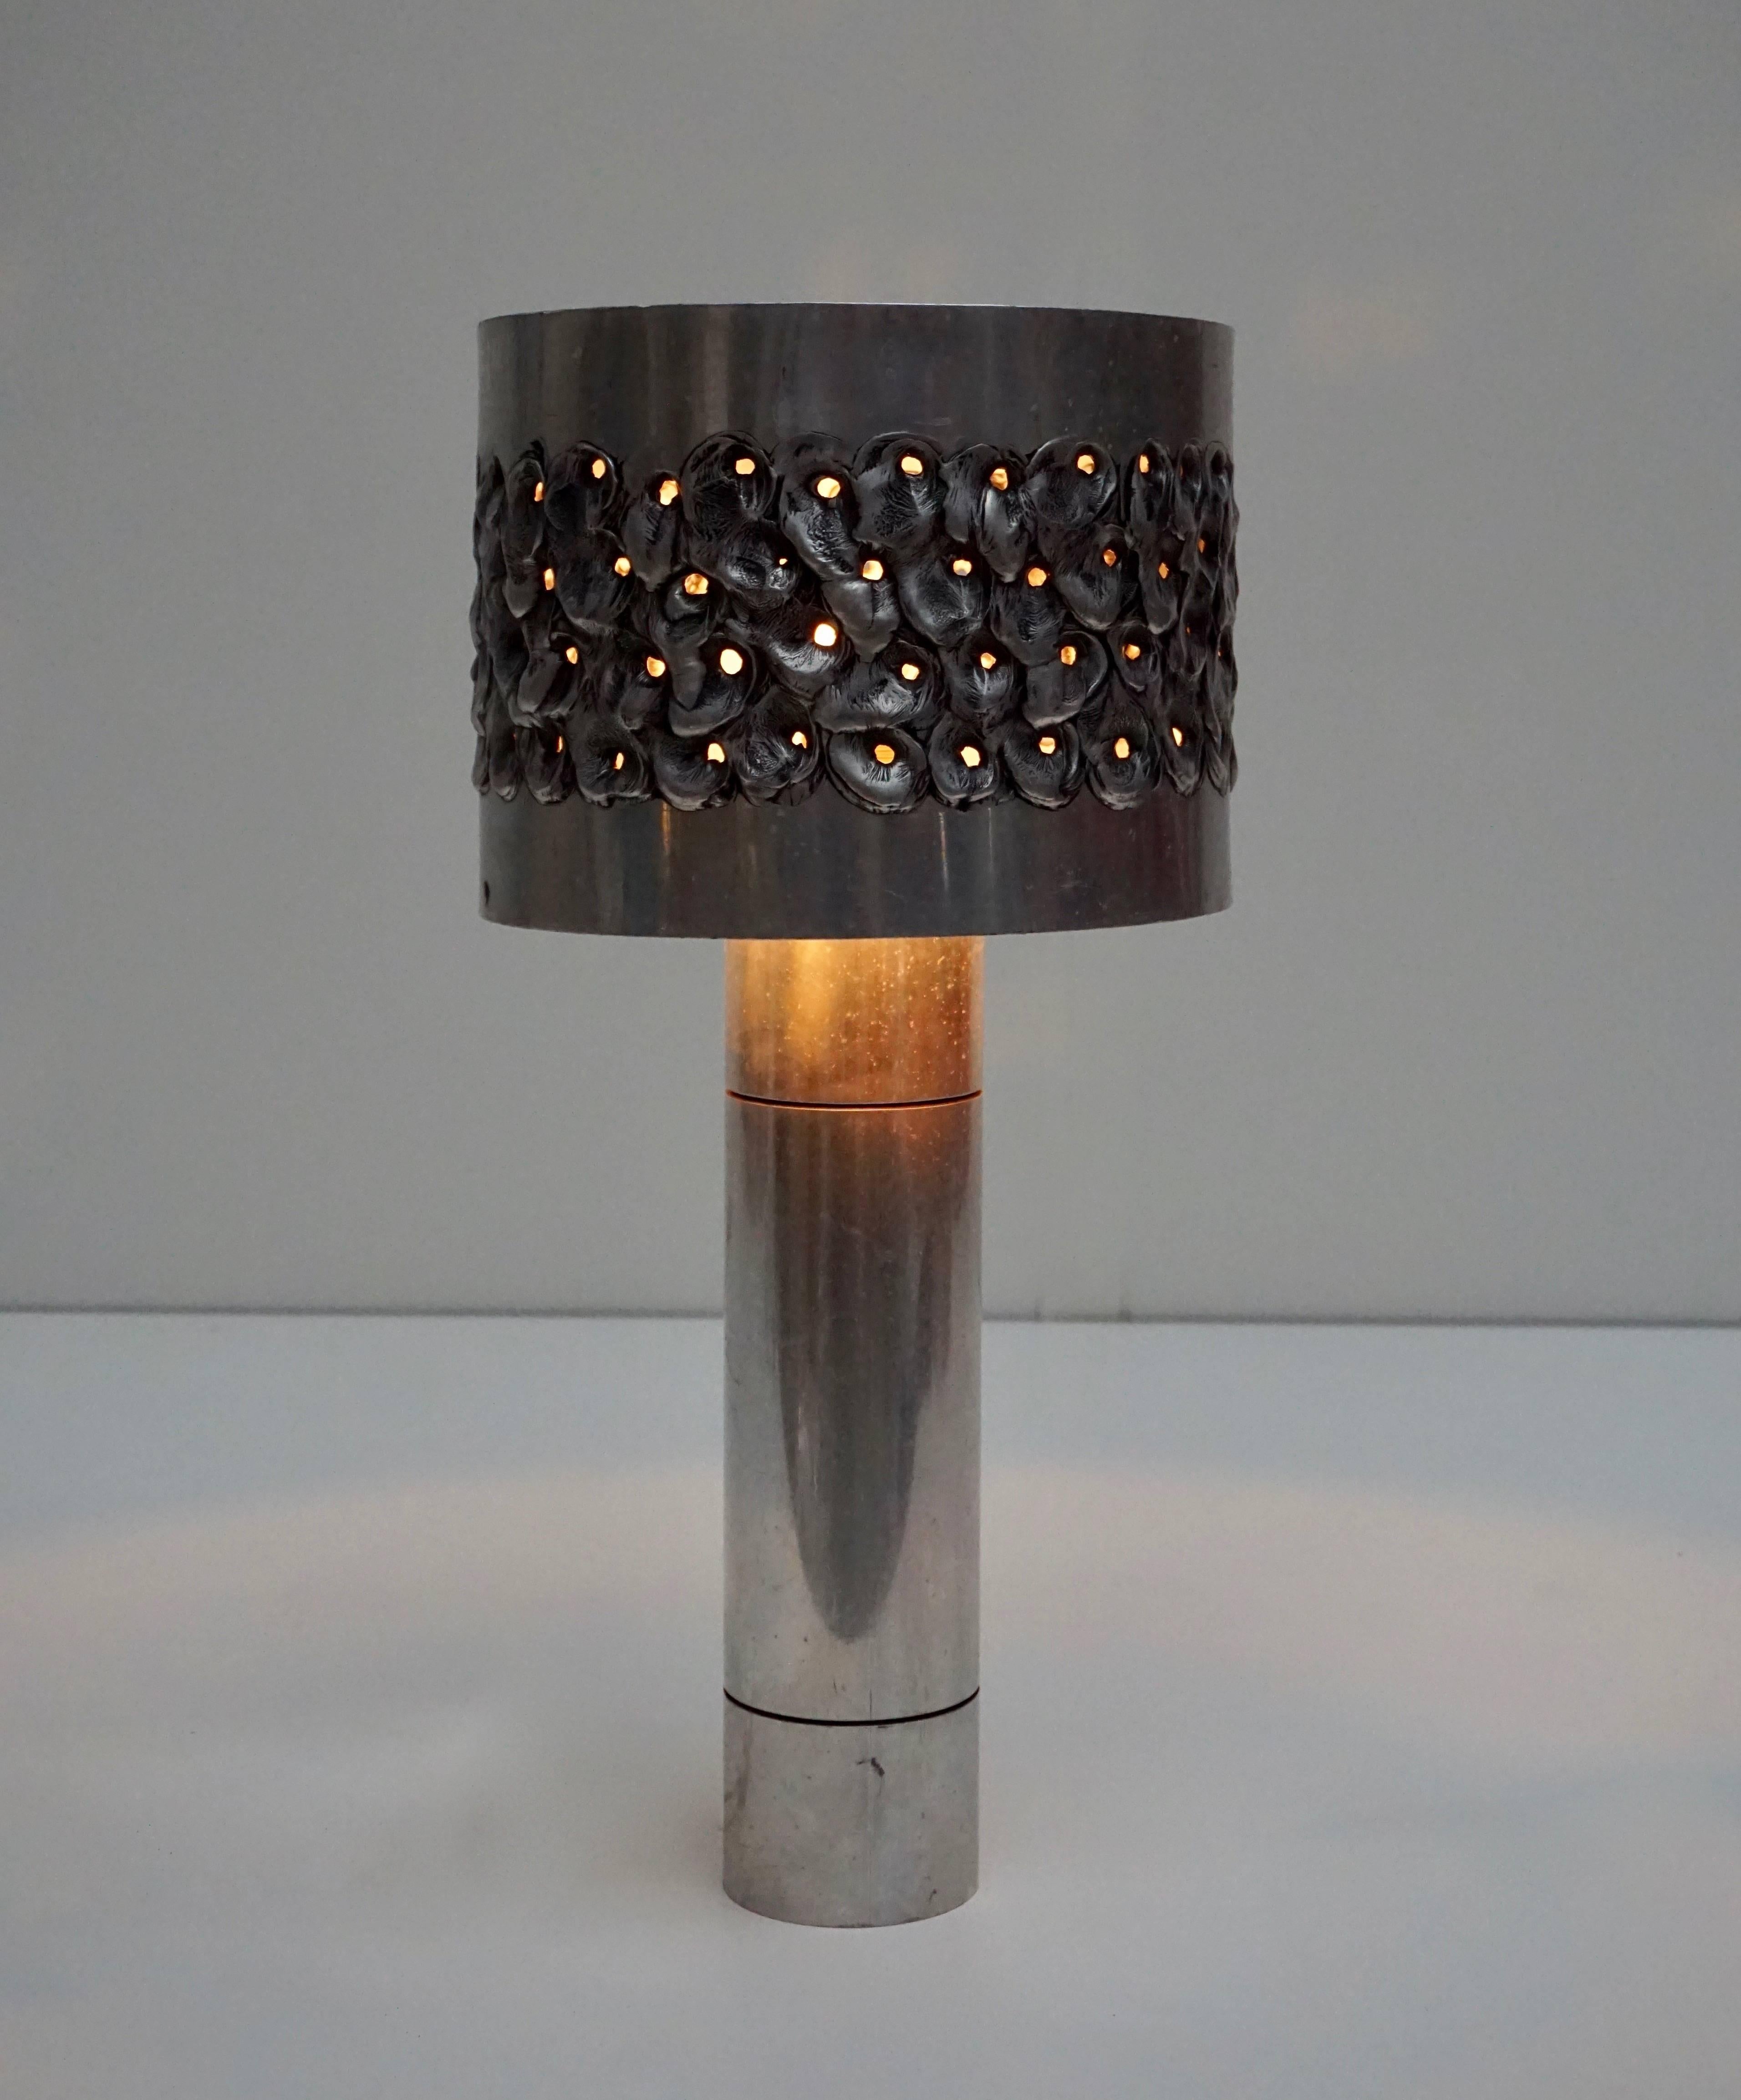 Mid-Century Modernist brutalist table lamp by Willy Luyckx,Belgium.

Stunning brutalist table lamp made from cast aluminum.This lamp was made by belgian goldsmith Willy Luyckx for a Belgian company called Aluclair.  

Willy Luyckx was a goldsmith